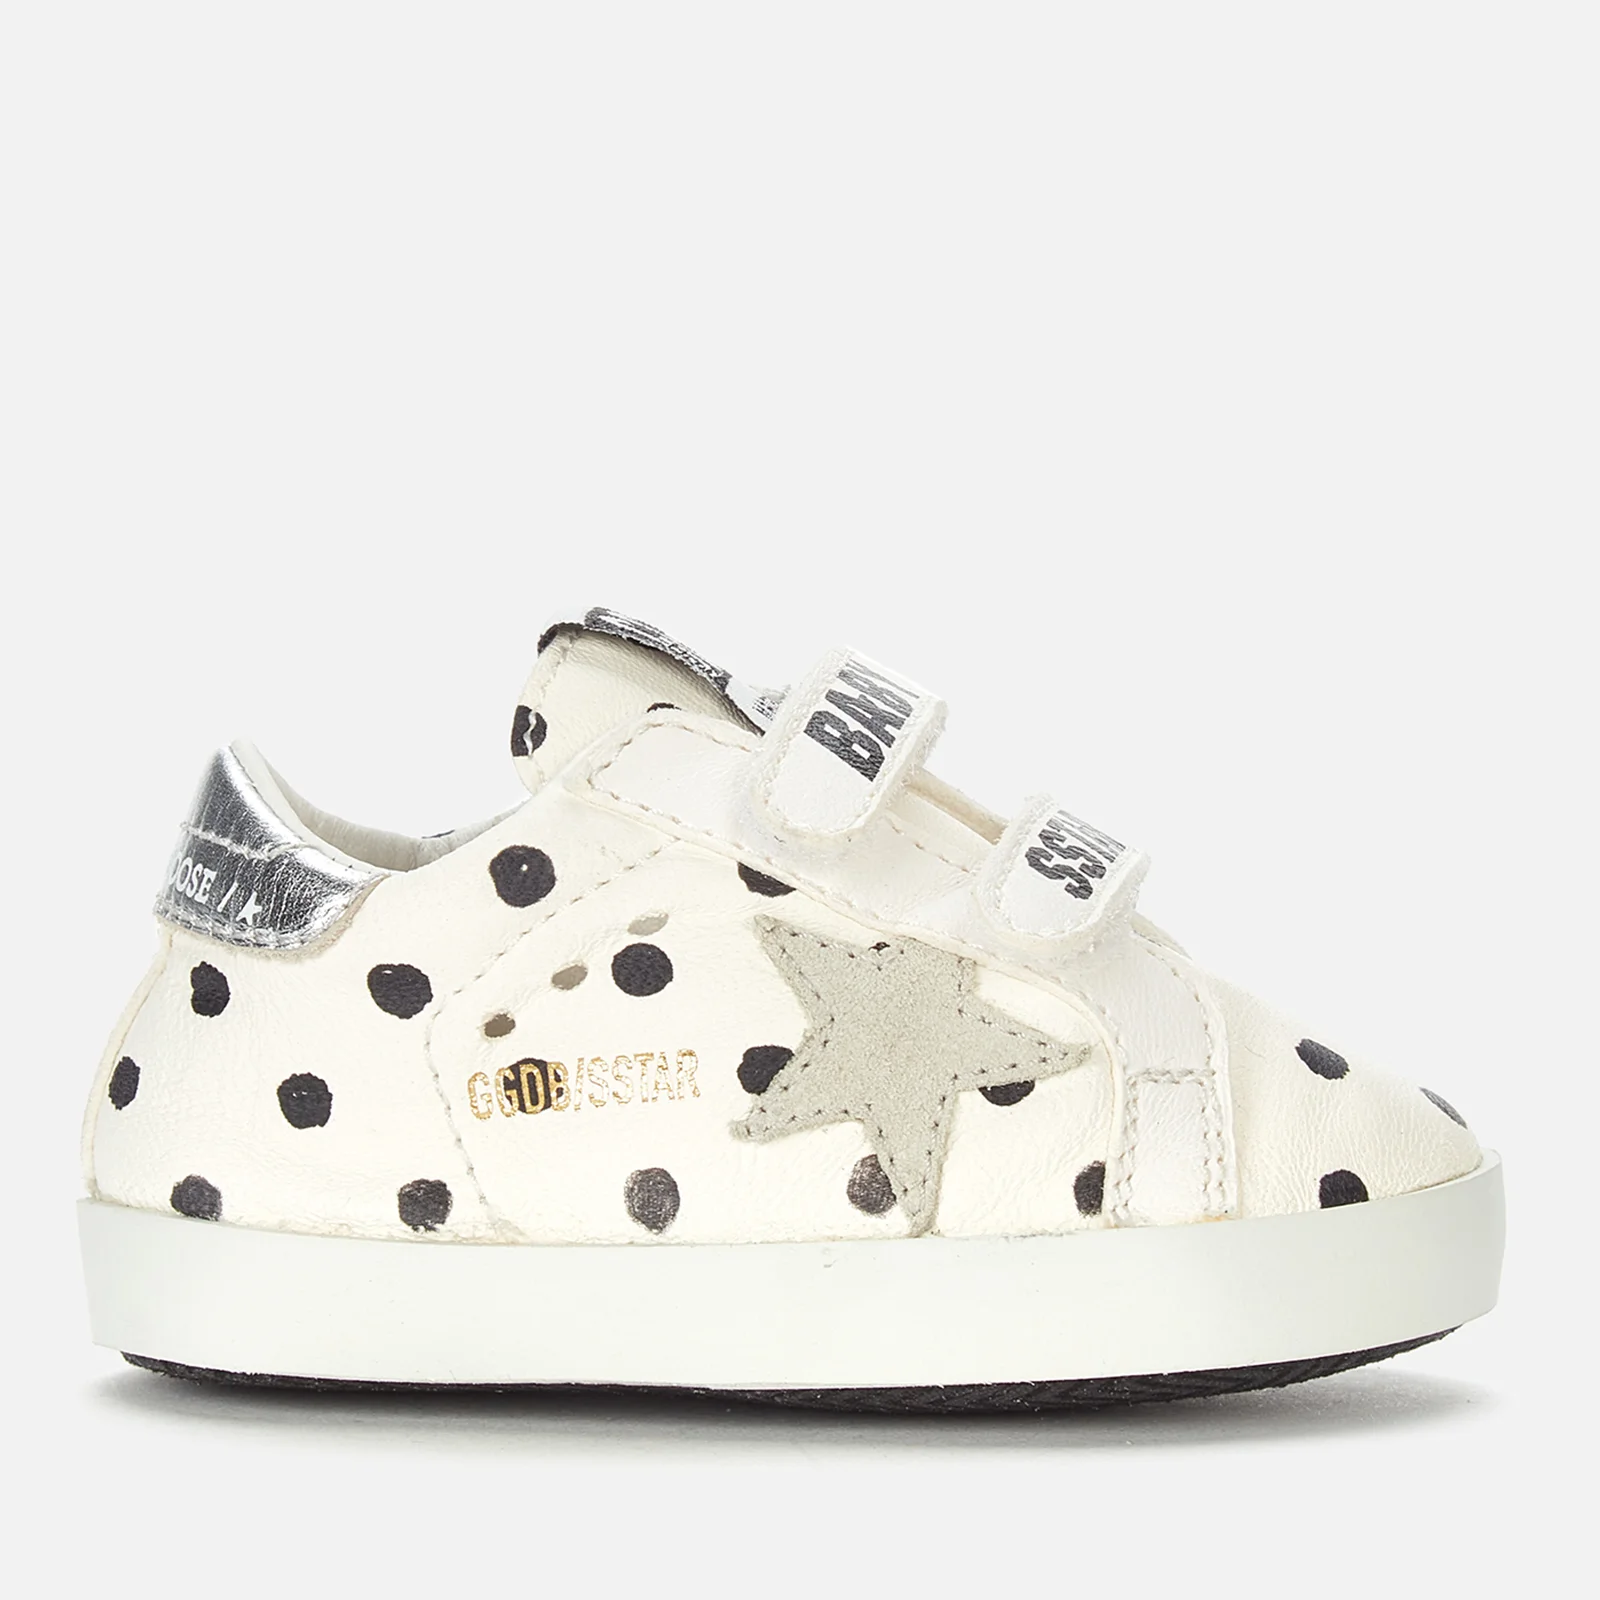 Golden Goose Babies' School Pois Print Trainers - White/Black Pois/Ice/Silver Image 1